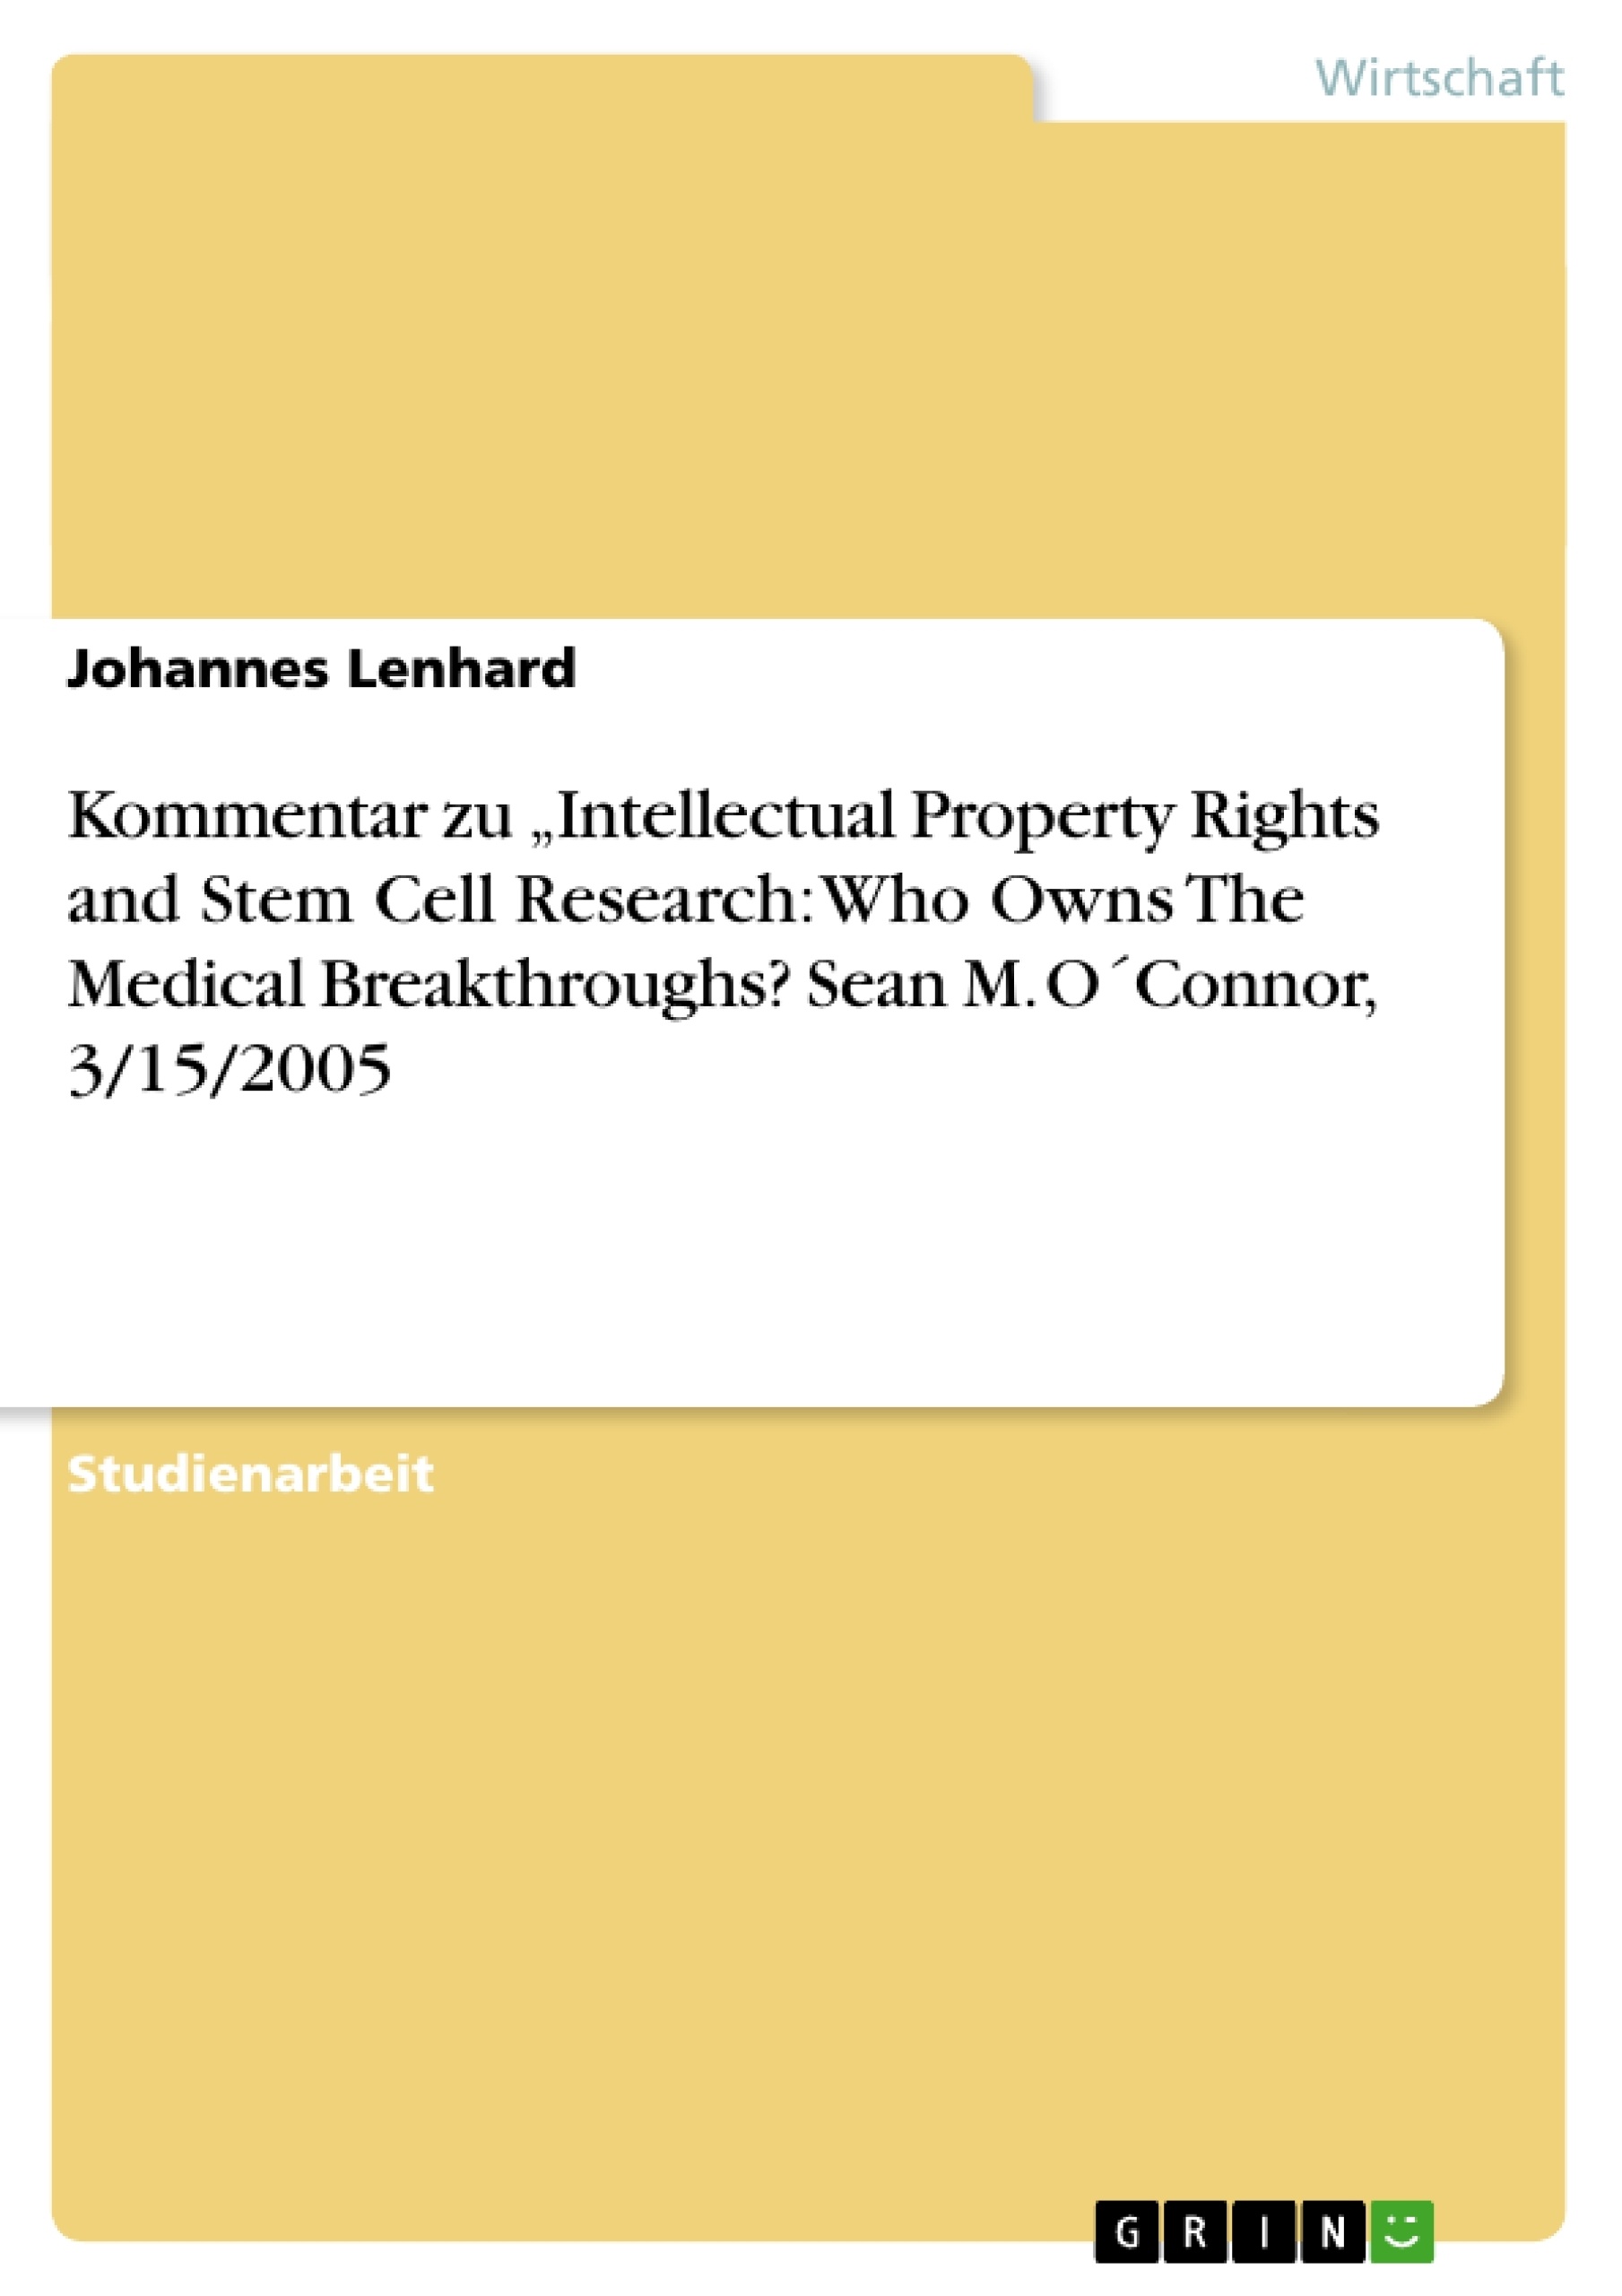 Titel: Kommentar zu  „Intellectual Property Rights and Stem Cell Research: Who Owns The Medical Breakthroughs?   Sean M. O´Connor, 3/15/2005 